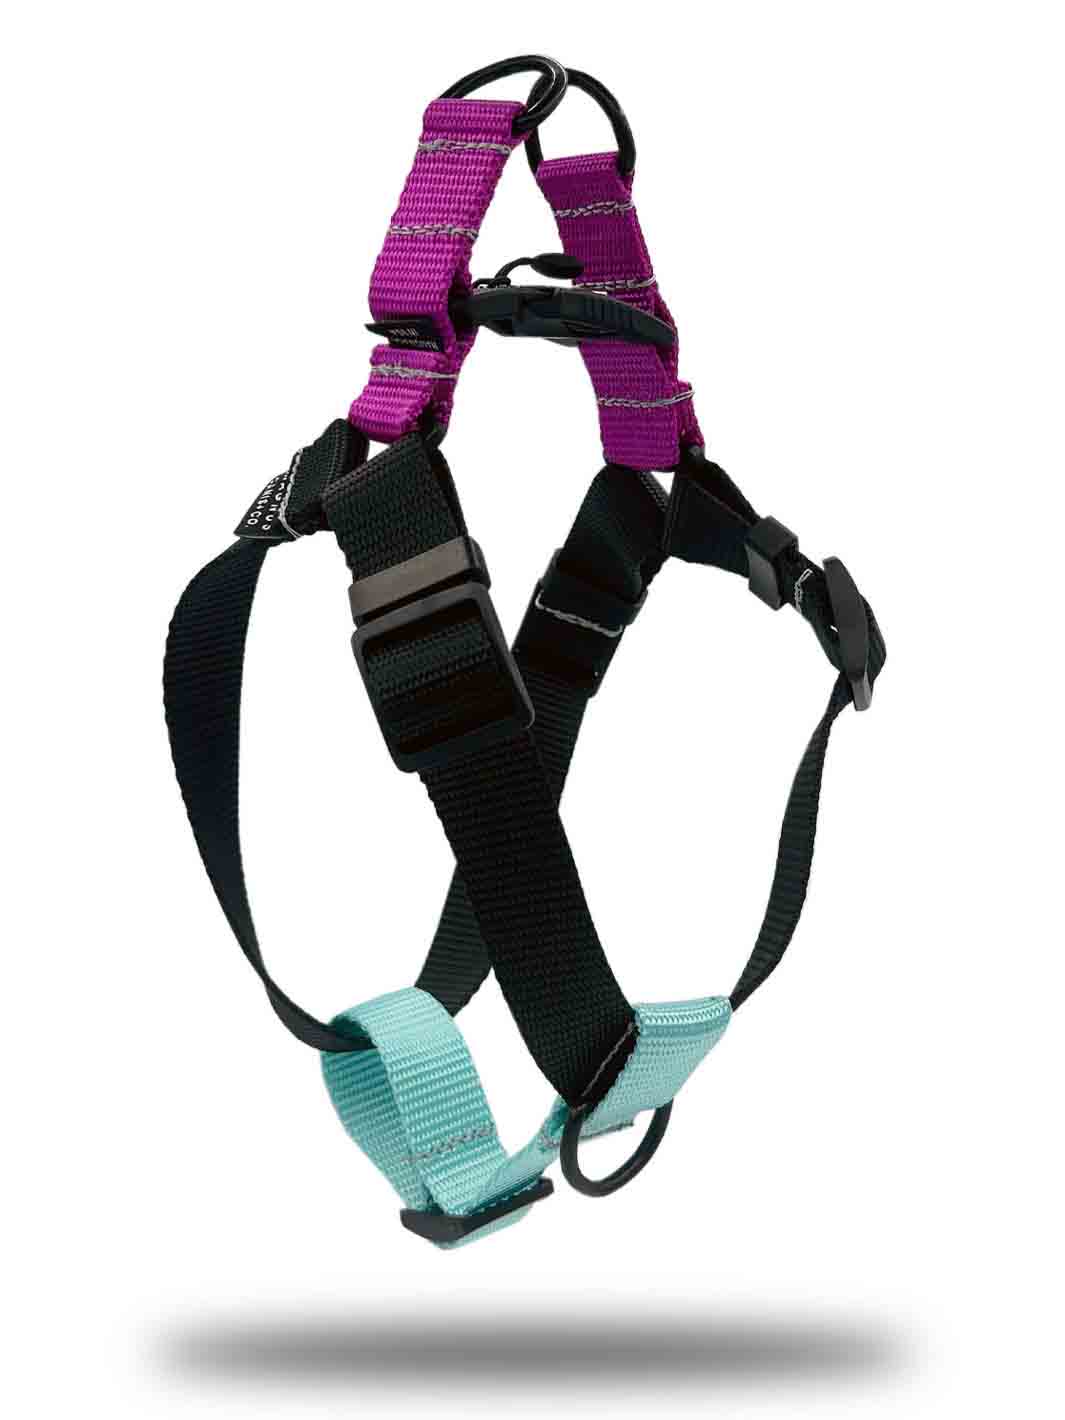 Nylon webbing strap dog harness with magnetic buckle by MAGNUS Canis.